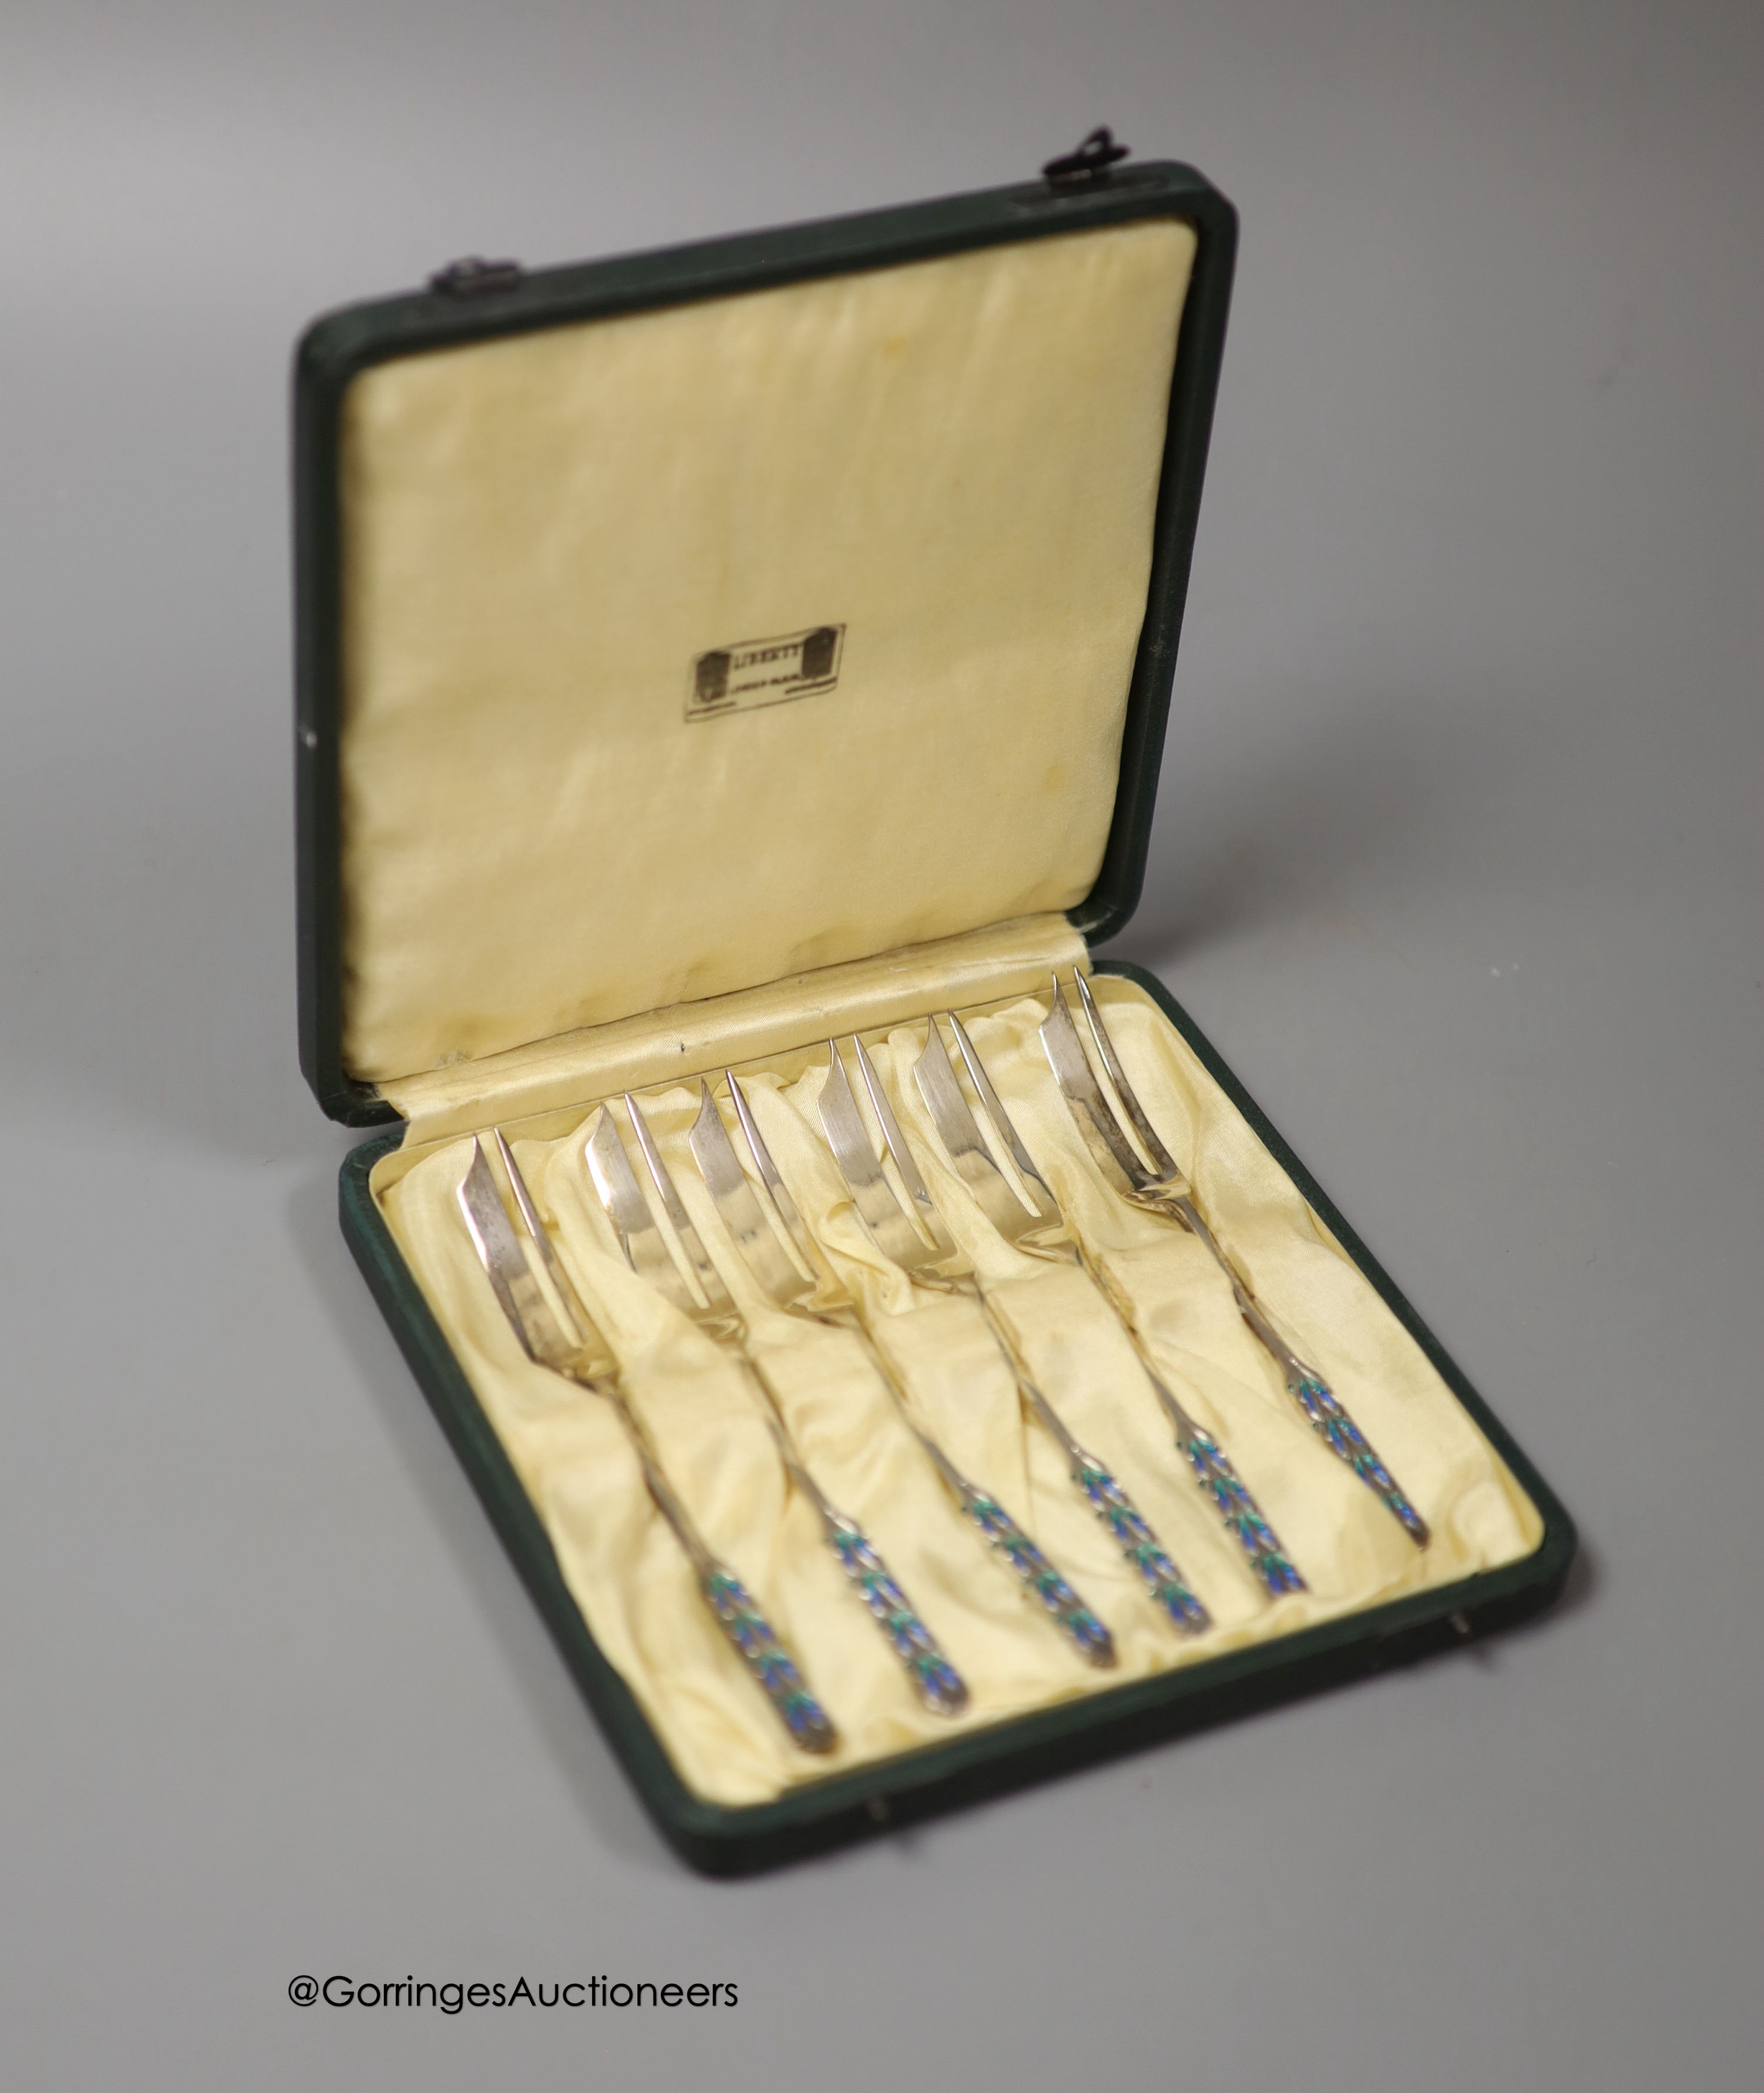 A cased set of George V Liberty & Co silver and enamel pastry forks, Birmingham, 1928, in original Liberty & Co box